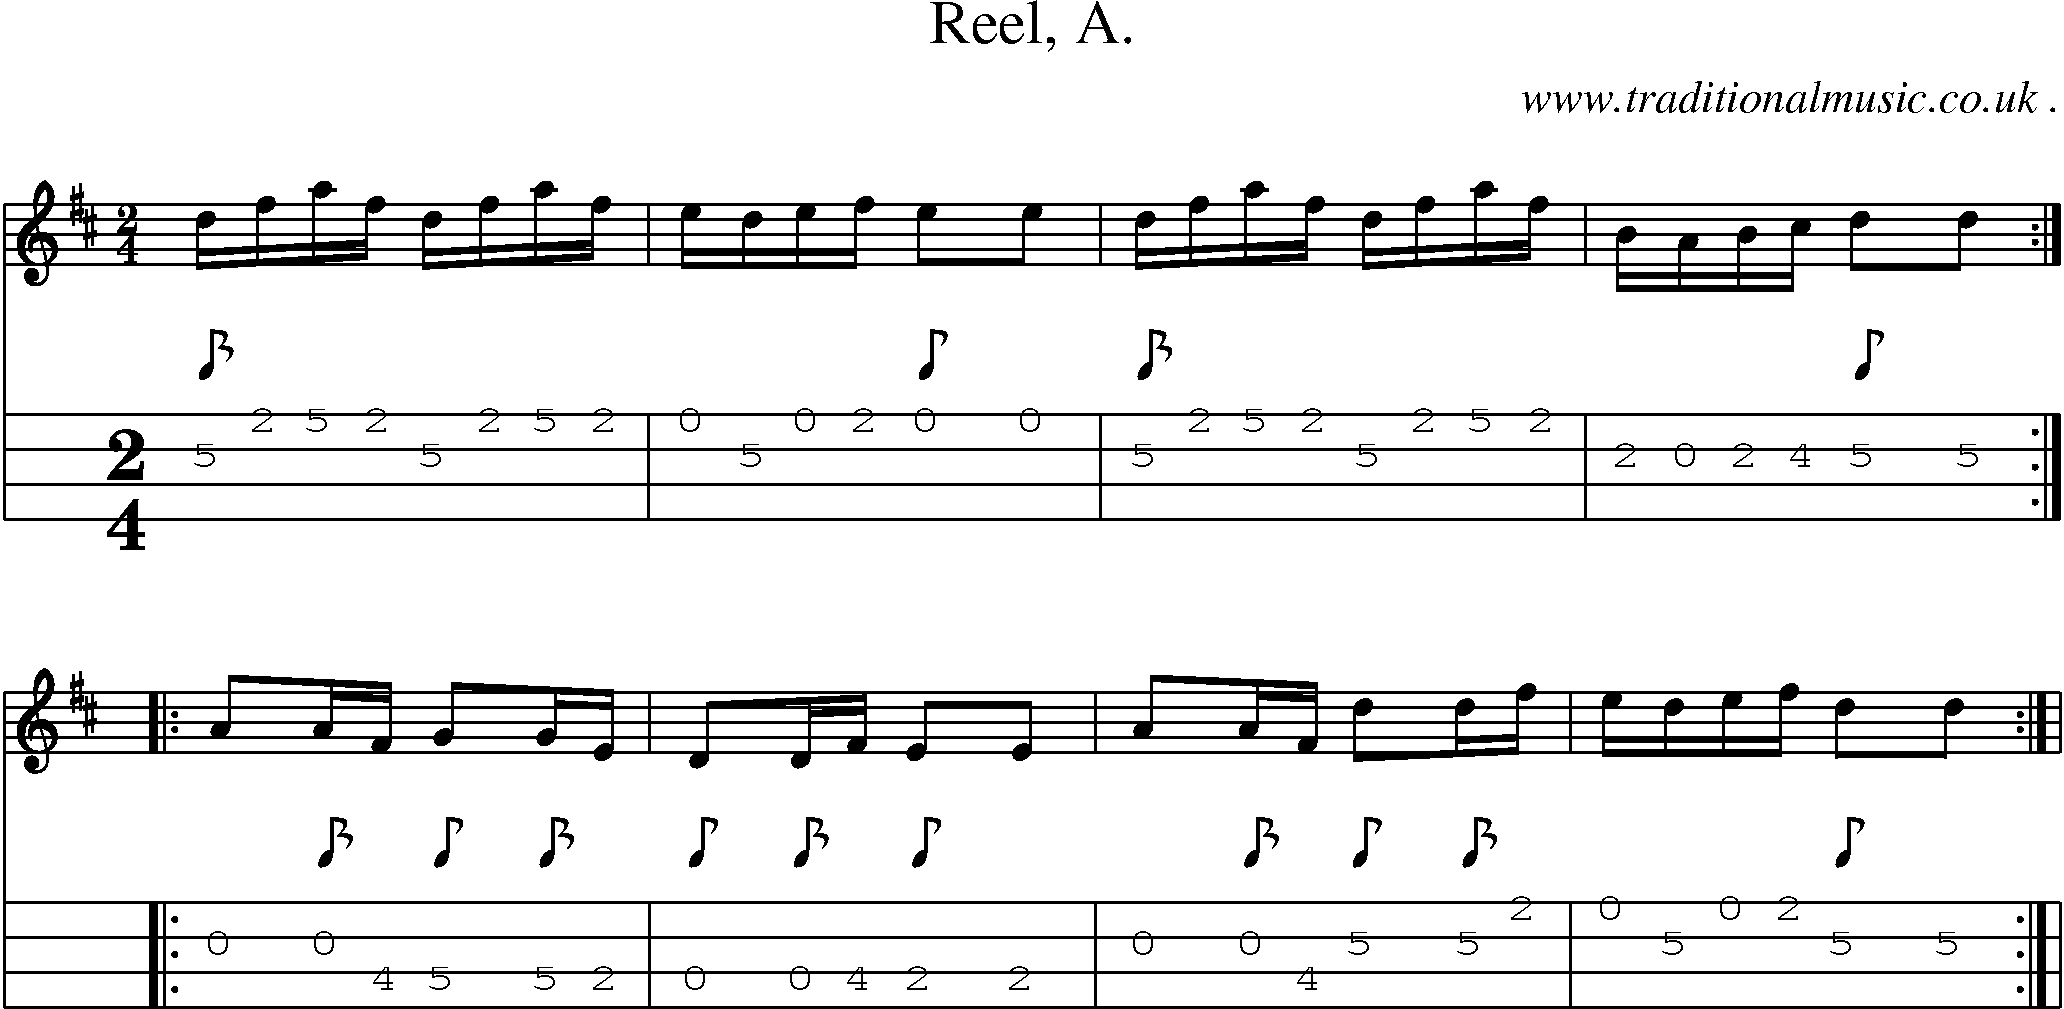 Sheet-Music and Mandolin Tabs for Reel A